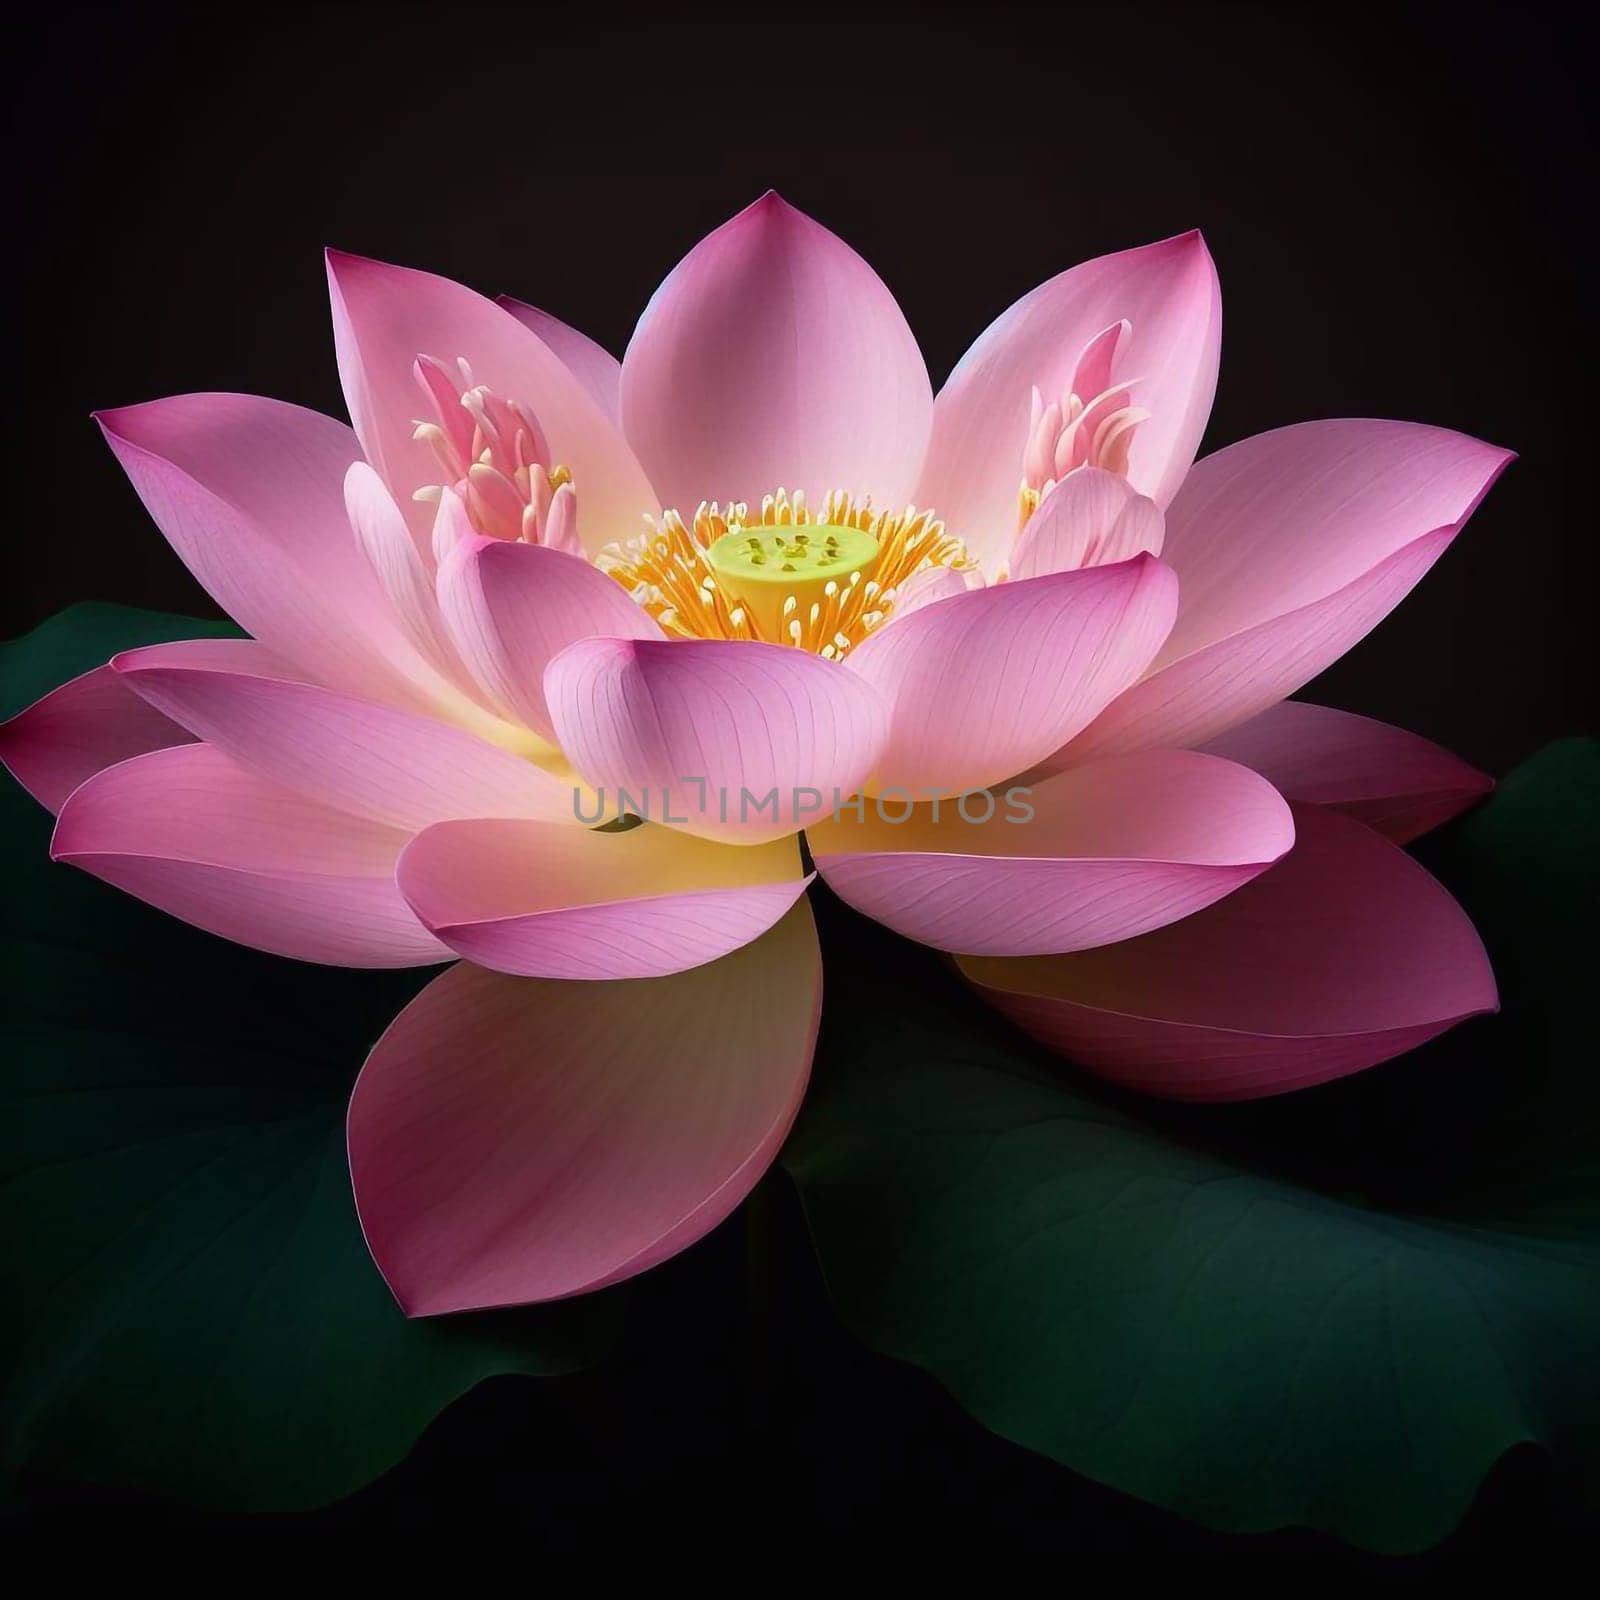 Lotus symbol unsullied purity and spiritual perfection by architectphd